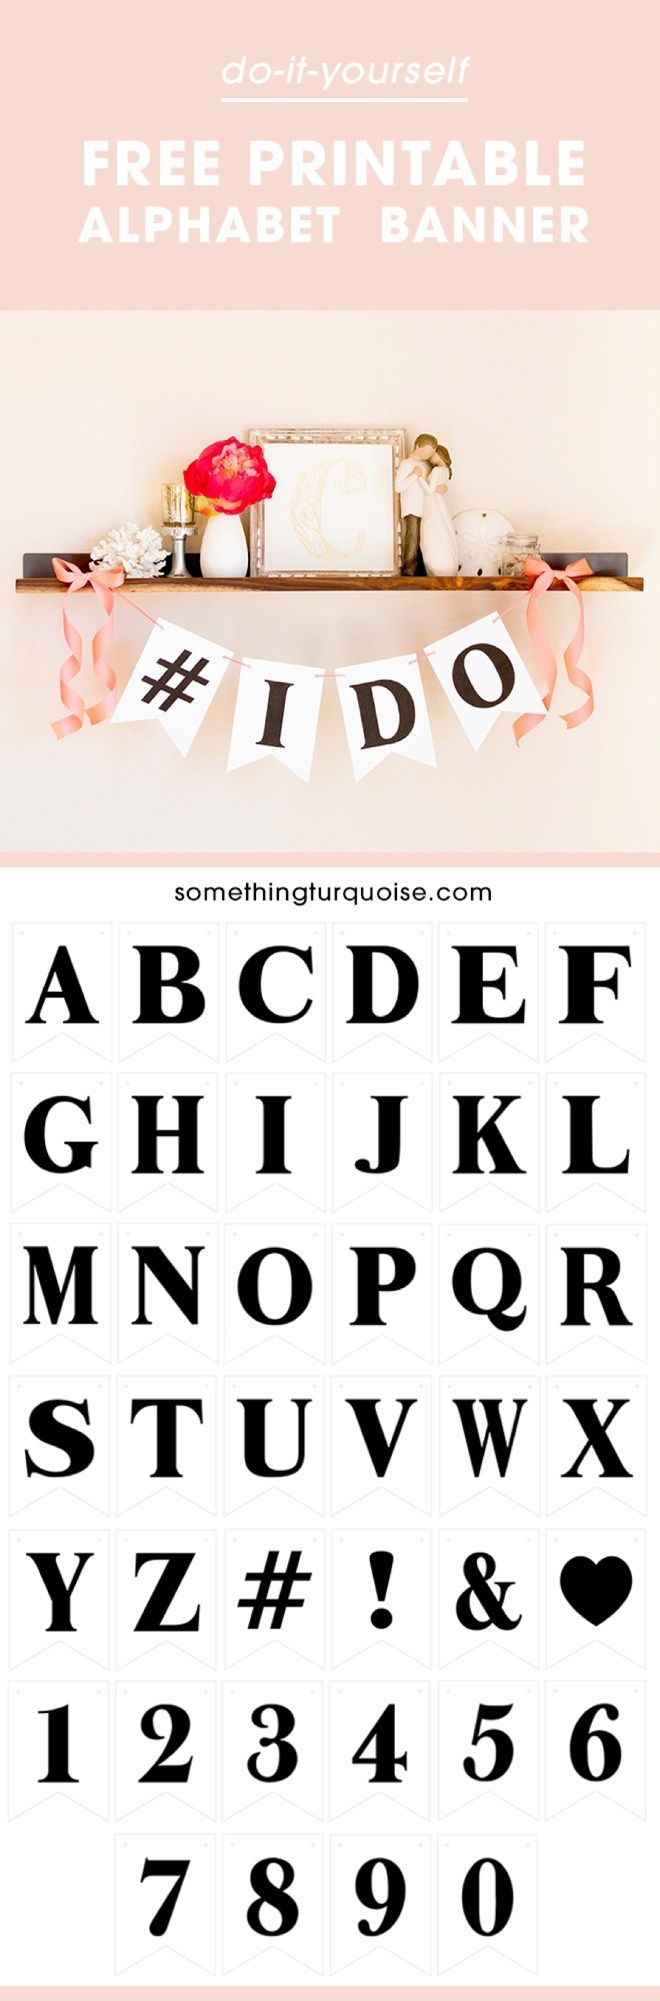 Free Printable Alphabet And Number Banner! Adorable! | Alphabet - Free Printable Alphabet And Numbers